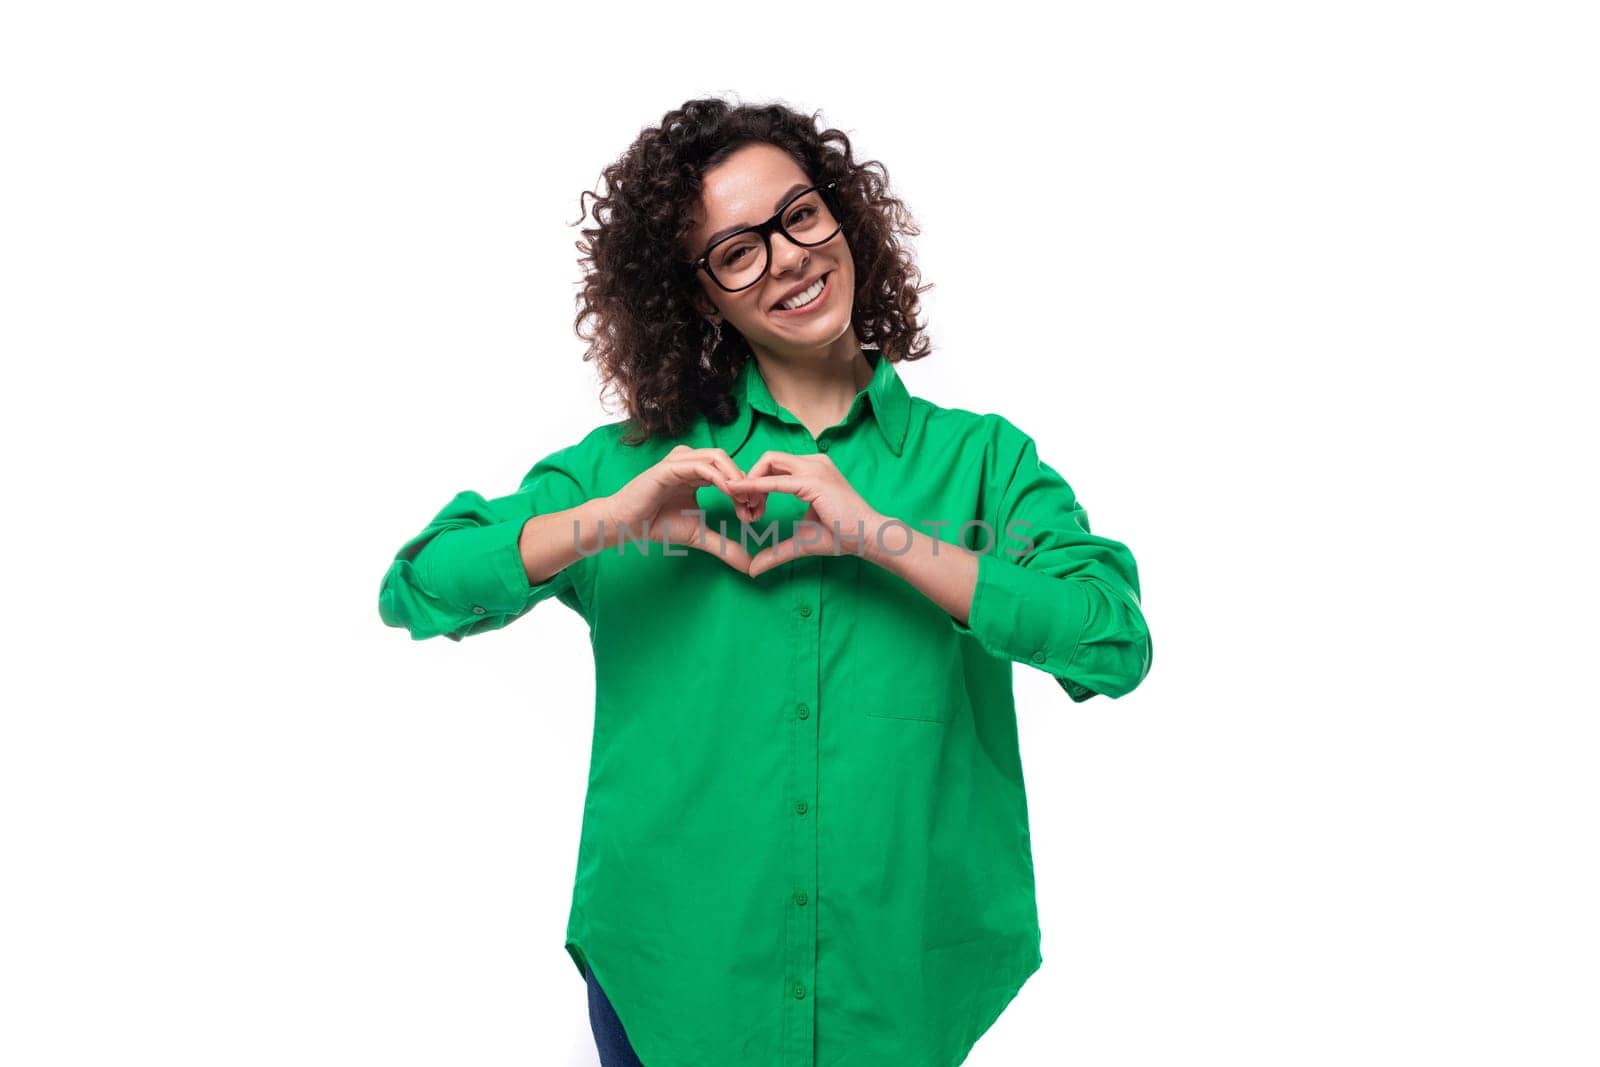 smiling office brunette woman with curly hair dressed in a green shirt on a white background by TRMK